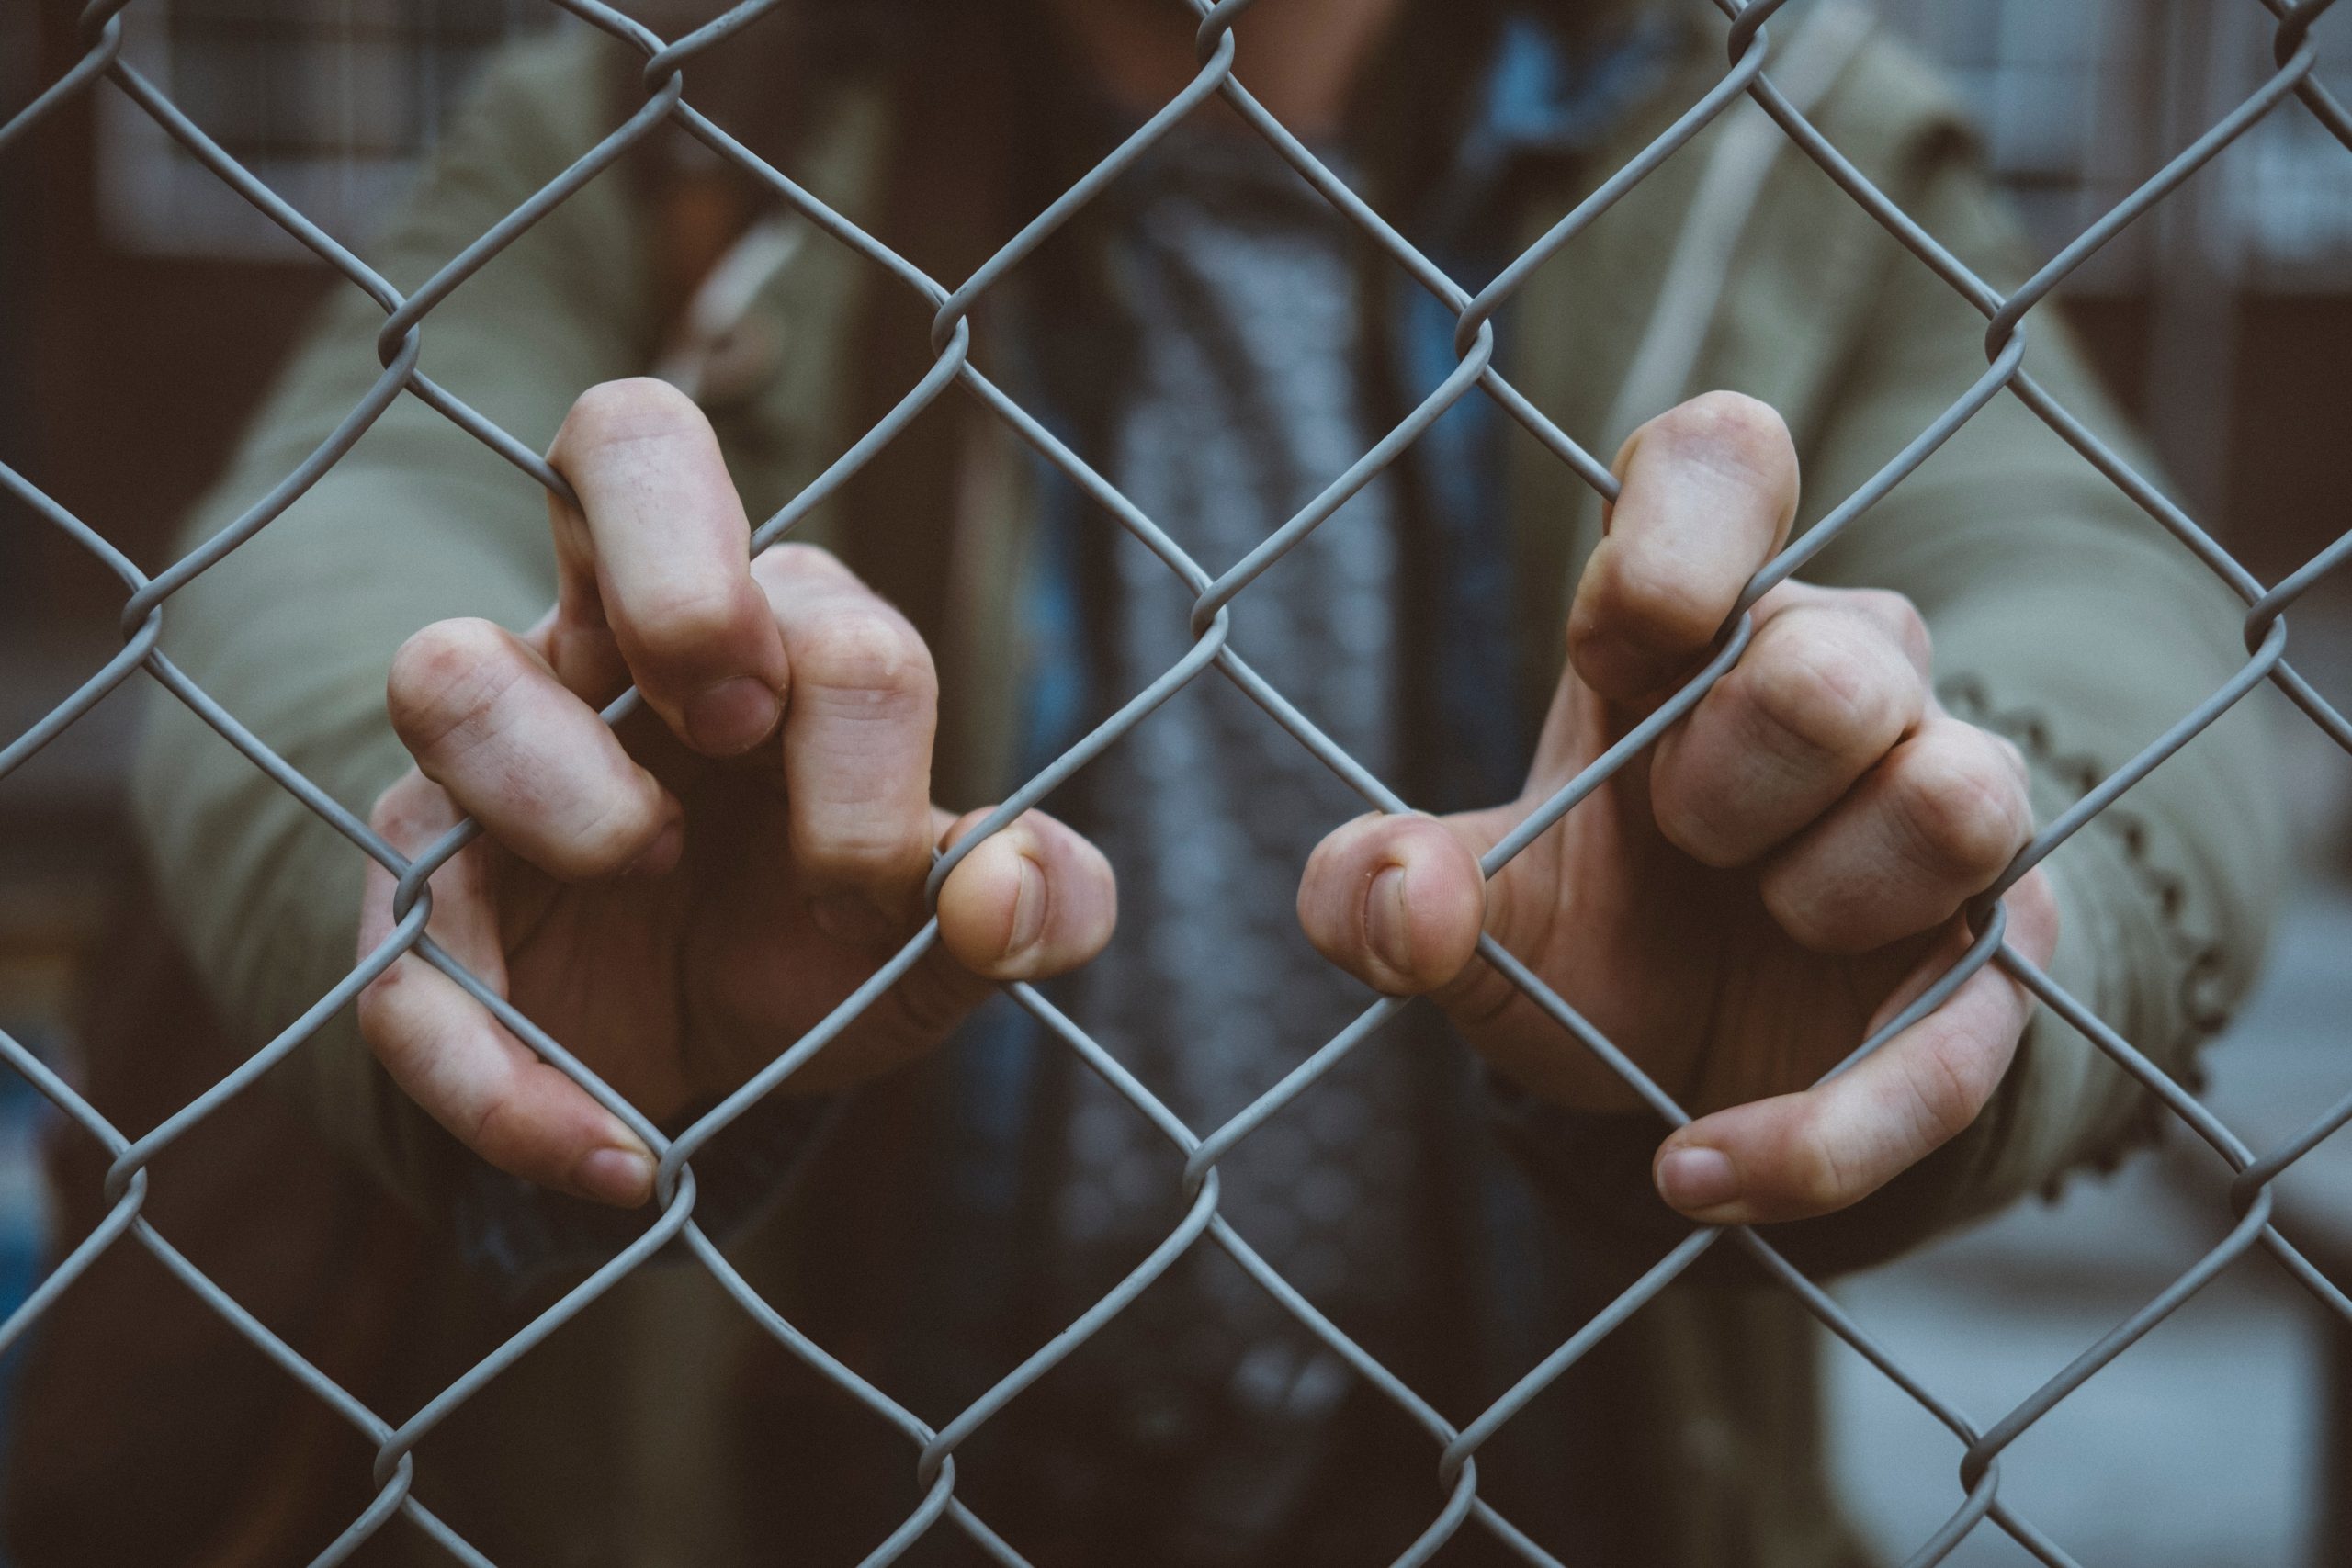 Man holding metal net fence with his hands- Mental Health Stigma